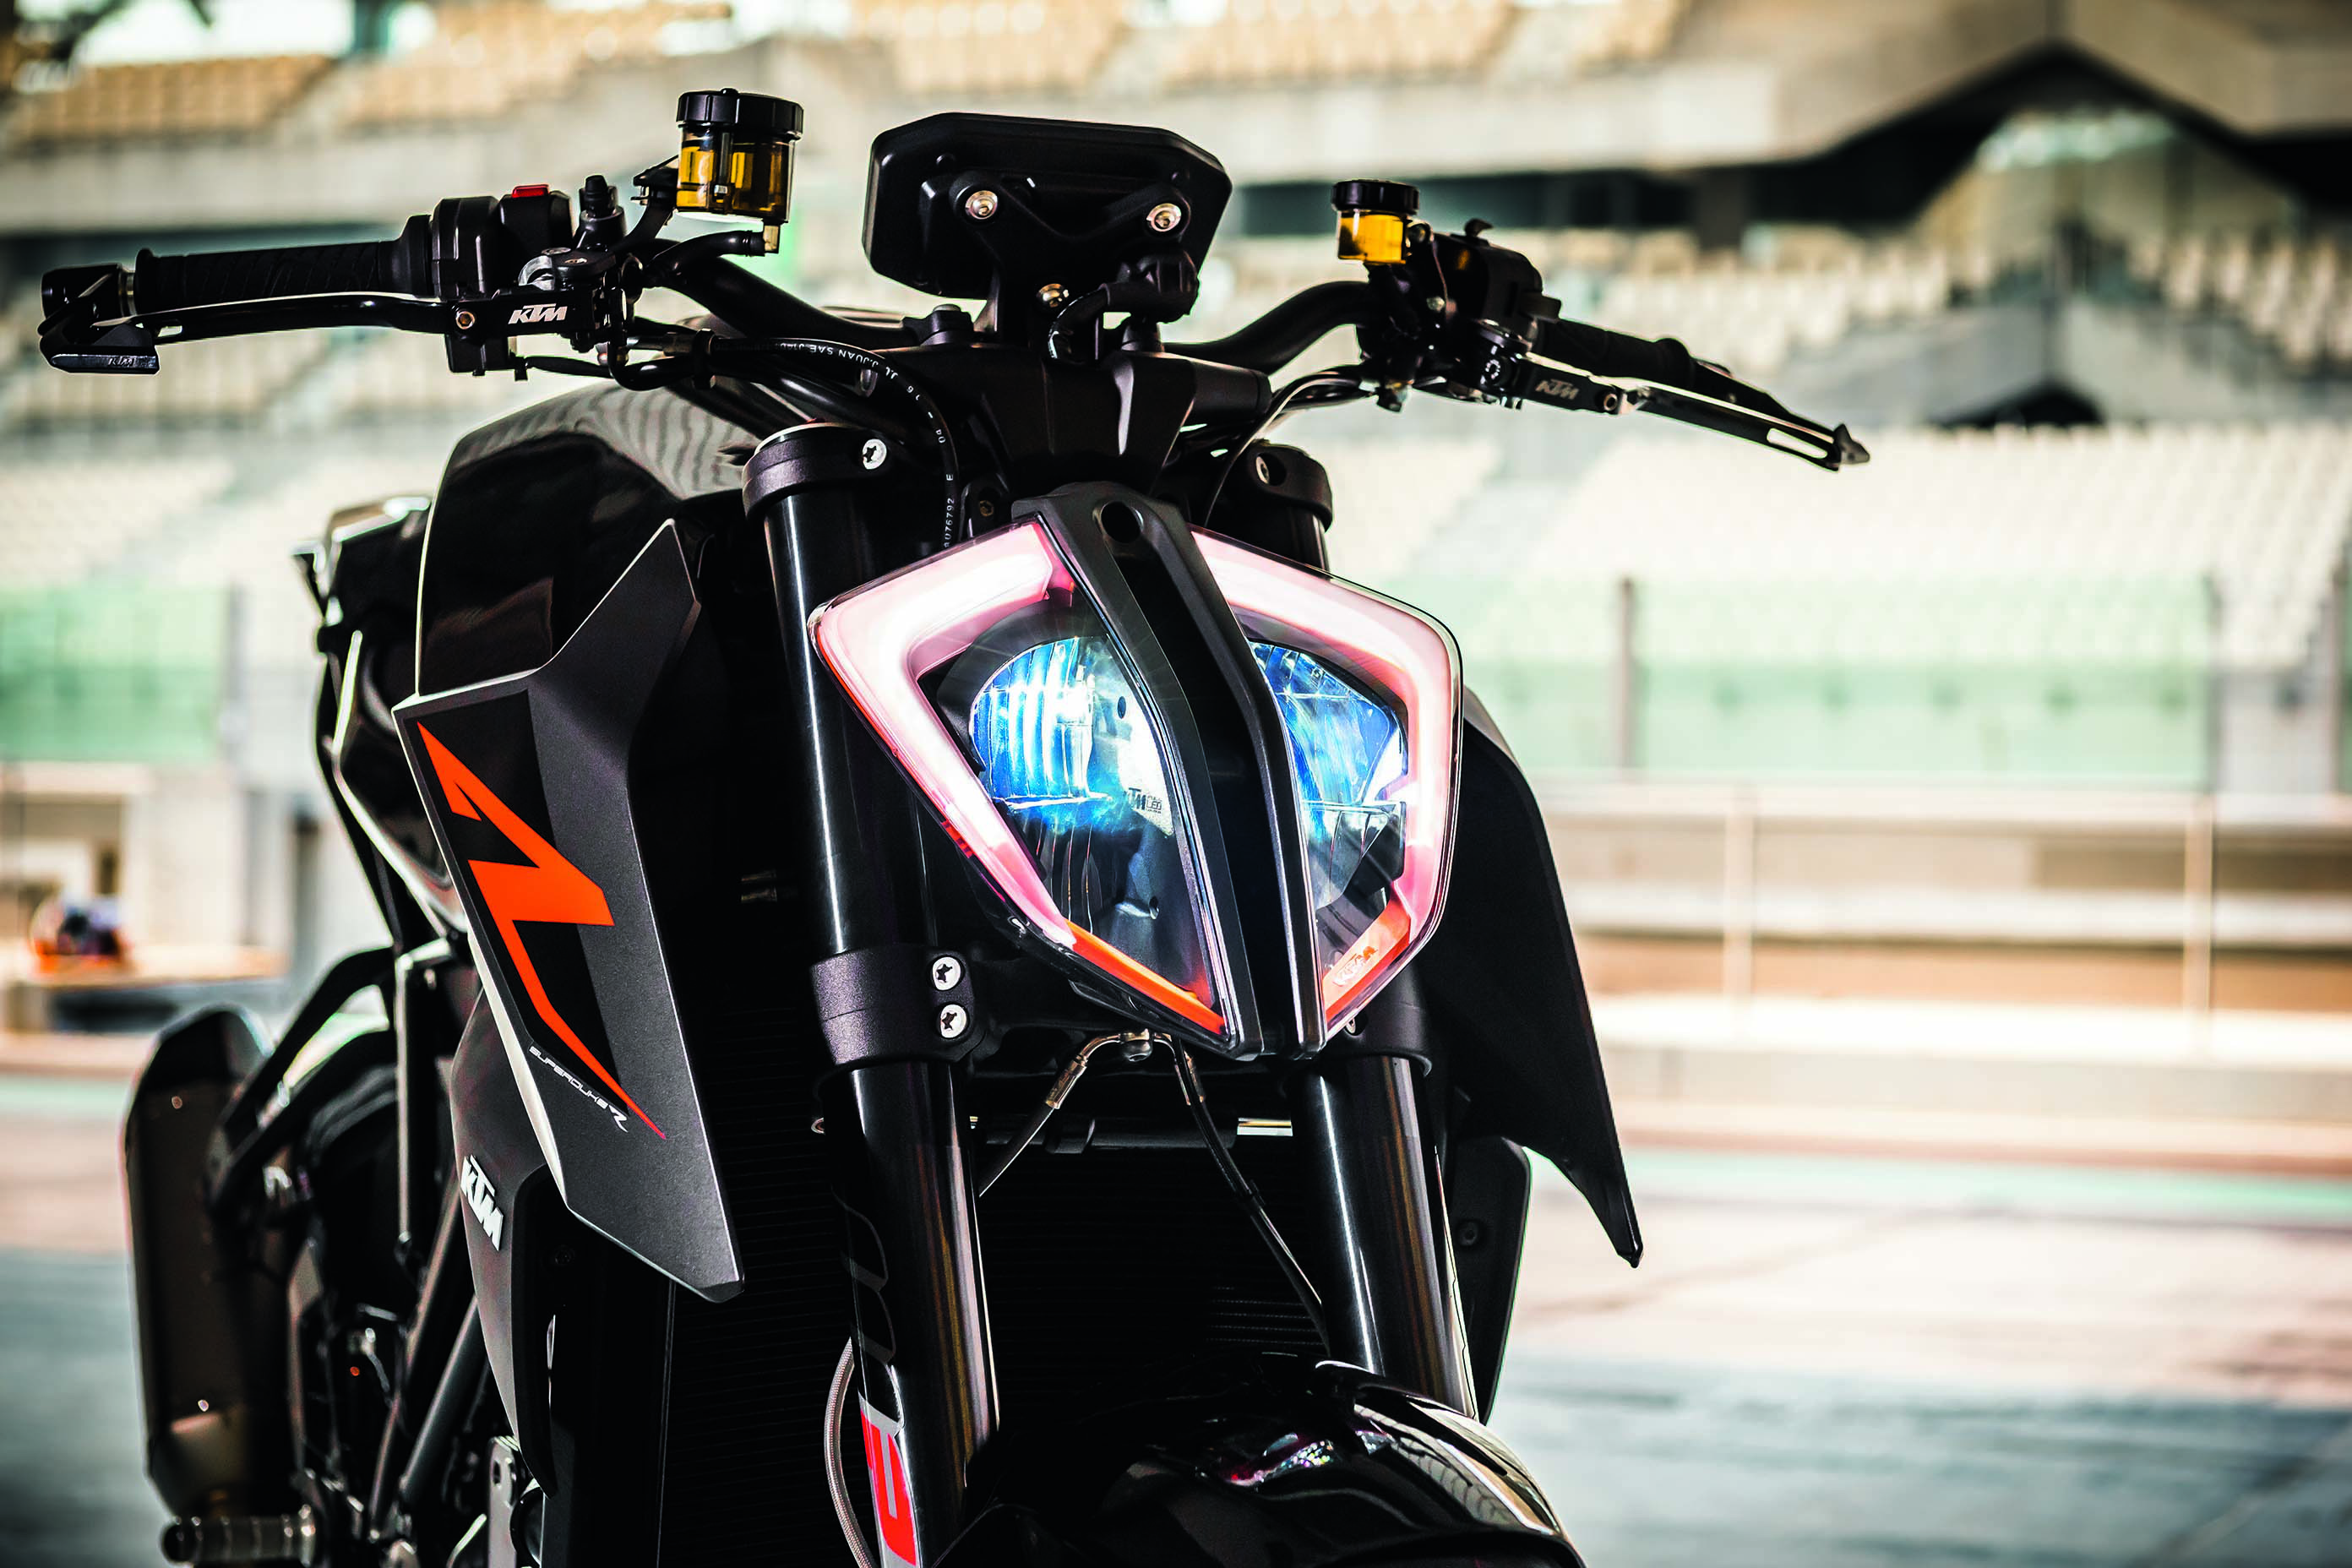 KTM 1290 Super Duke Front View, HD Bikes, 4k Wallpapers, Images, Backgrounds,  Photos and Pictures